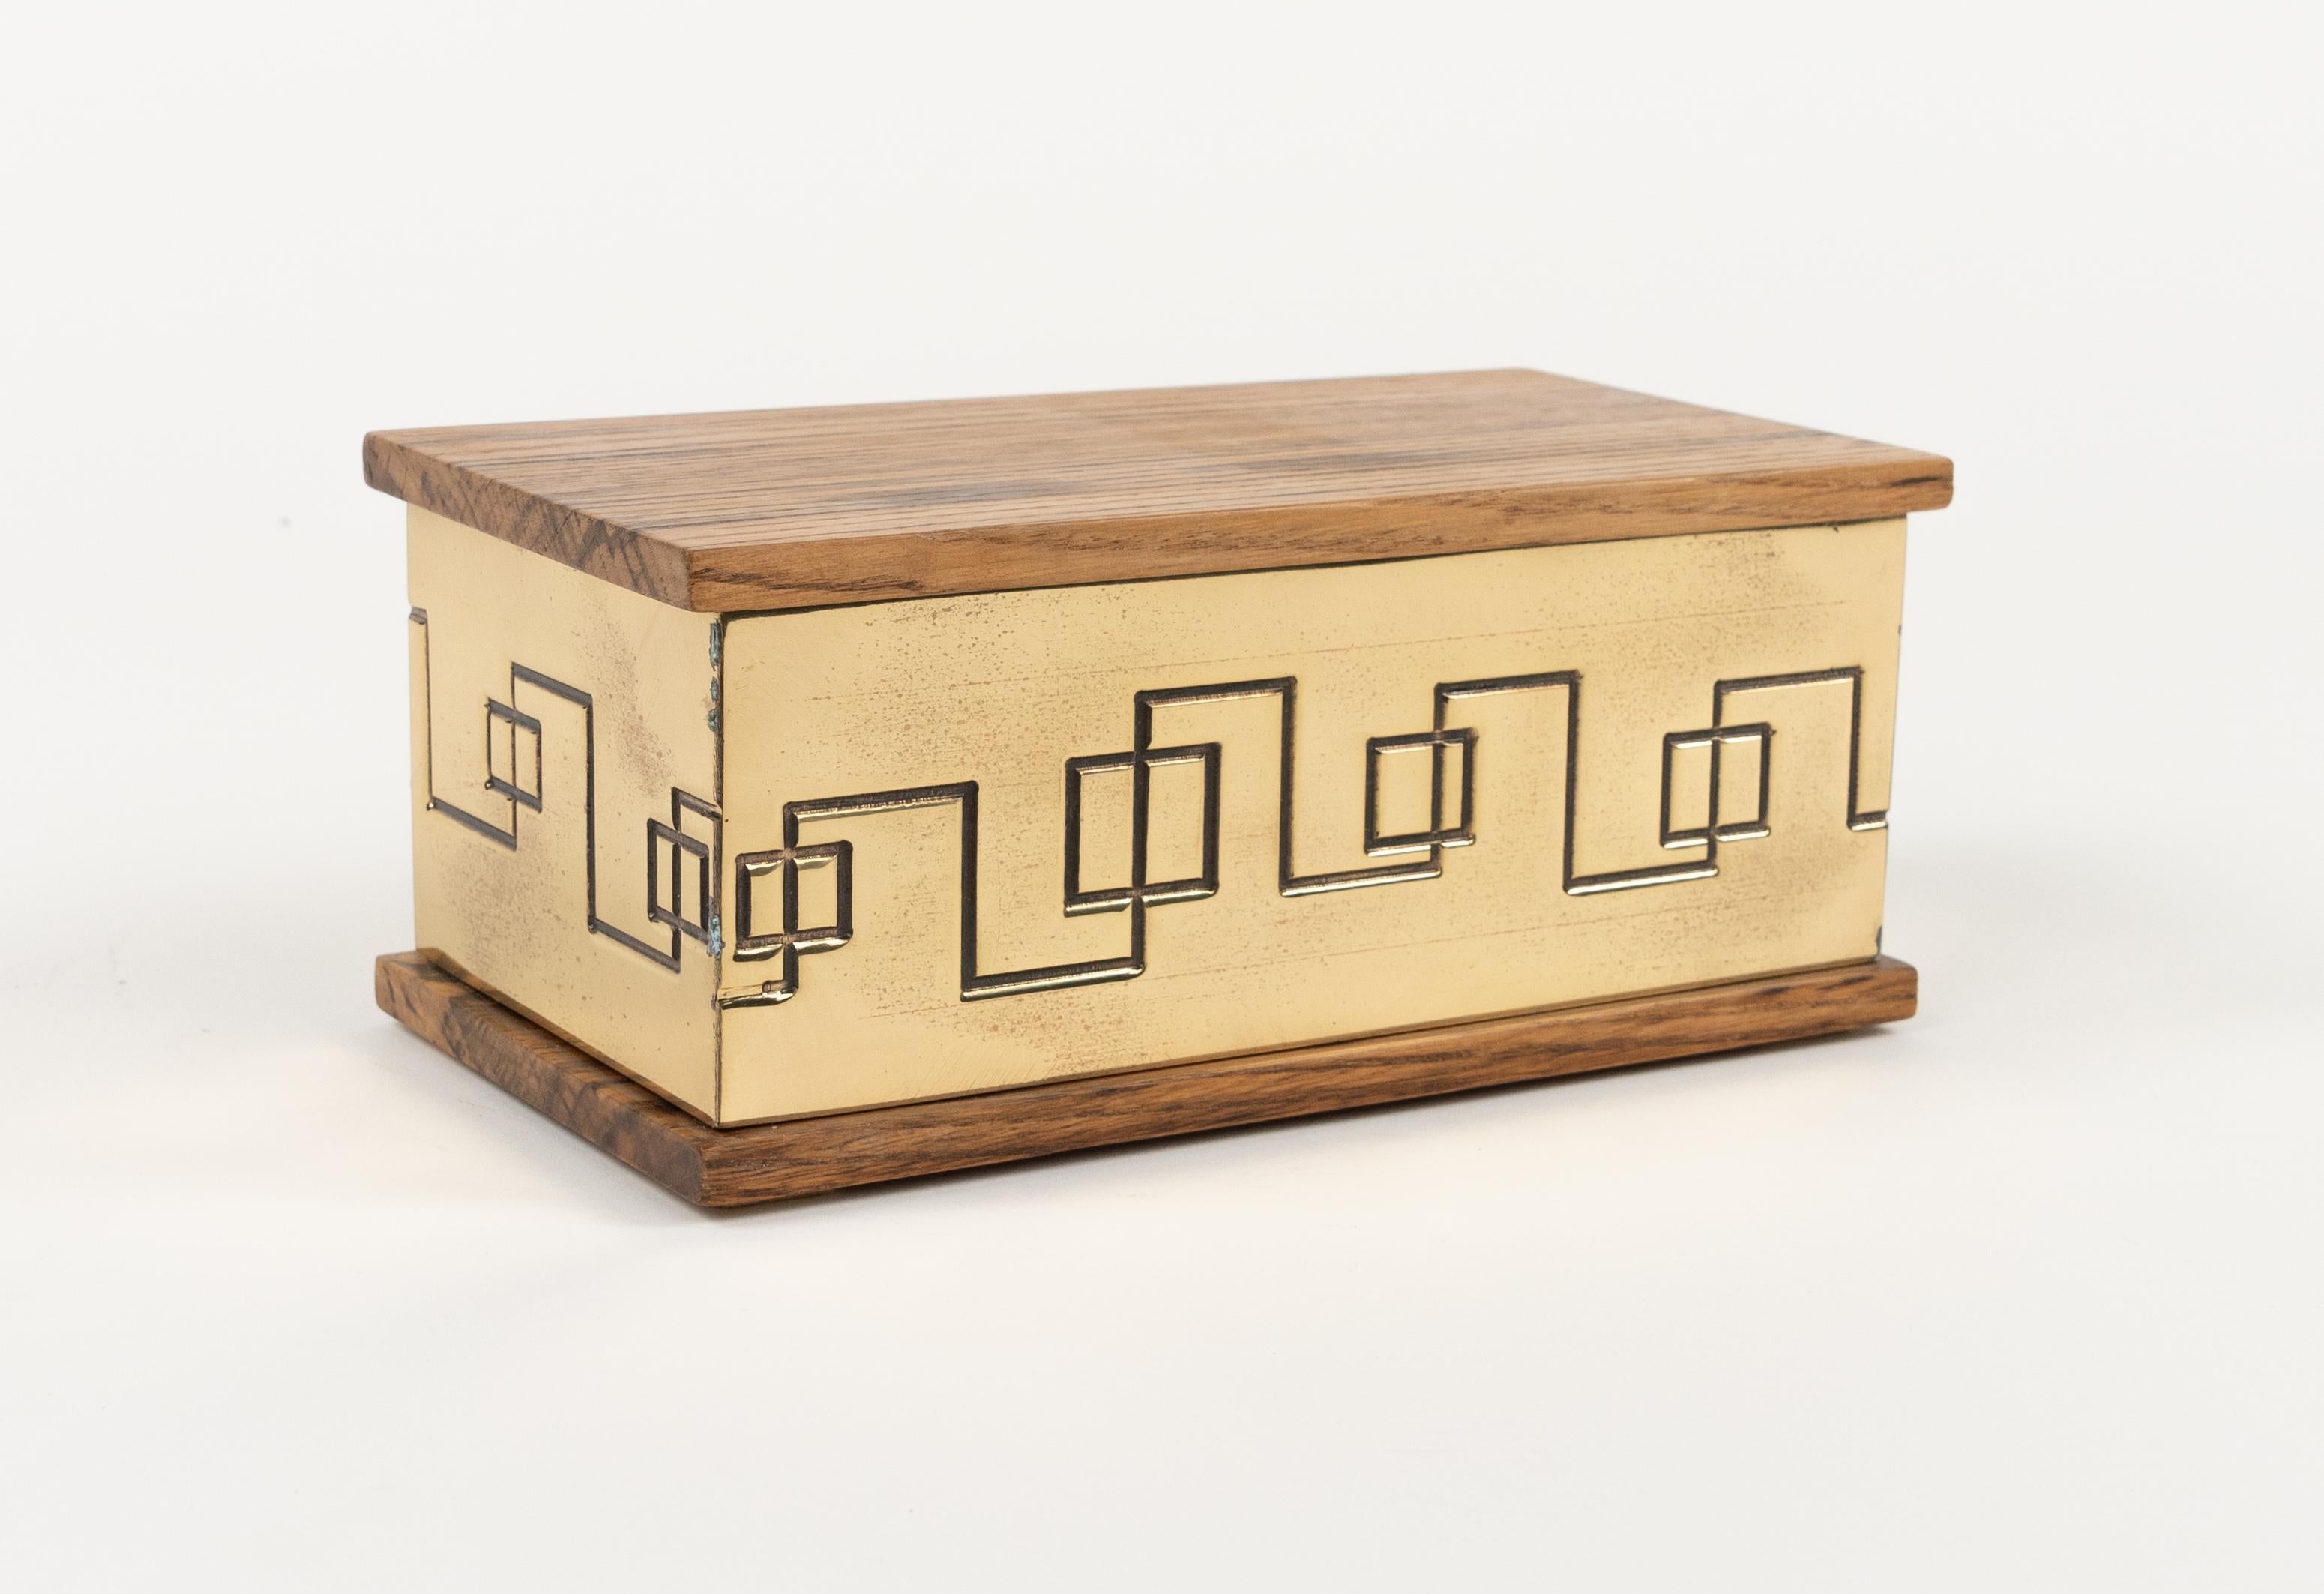 Italian Rectangular Decorative Box in Brass and Wood Luciano Frigerio Style, Italy 1970s For Sale